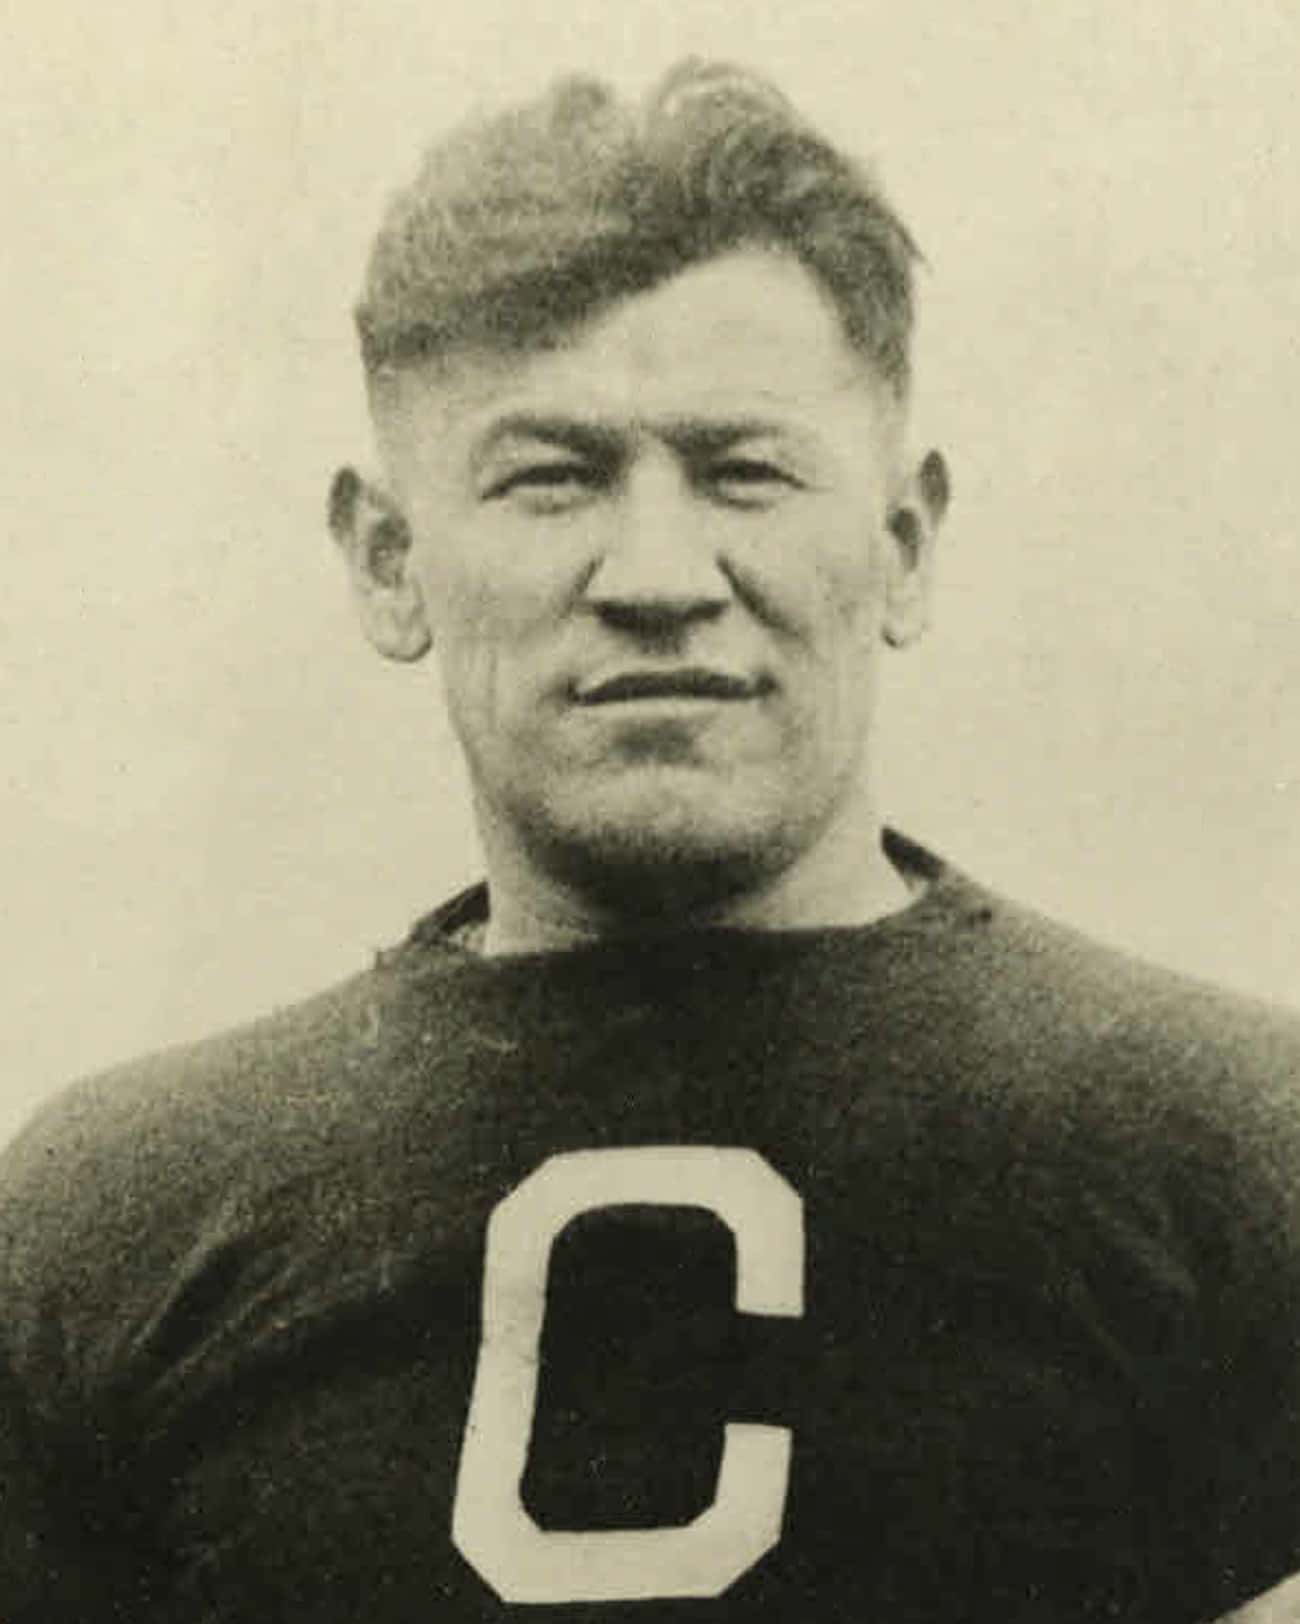 During His Professional Football Career, He Excelled As A Member Of The Canton Bulldogs